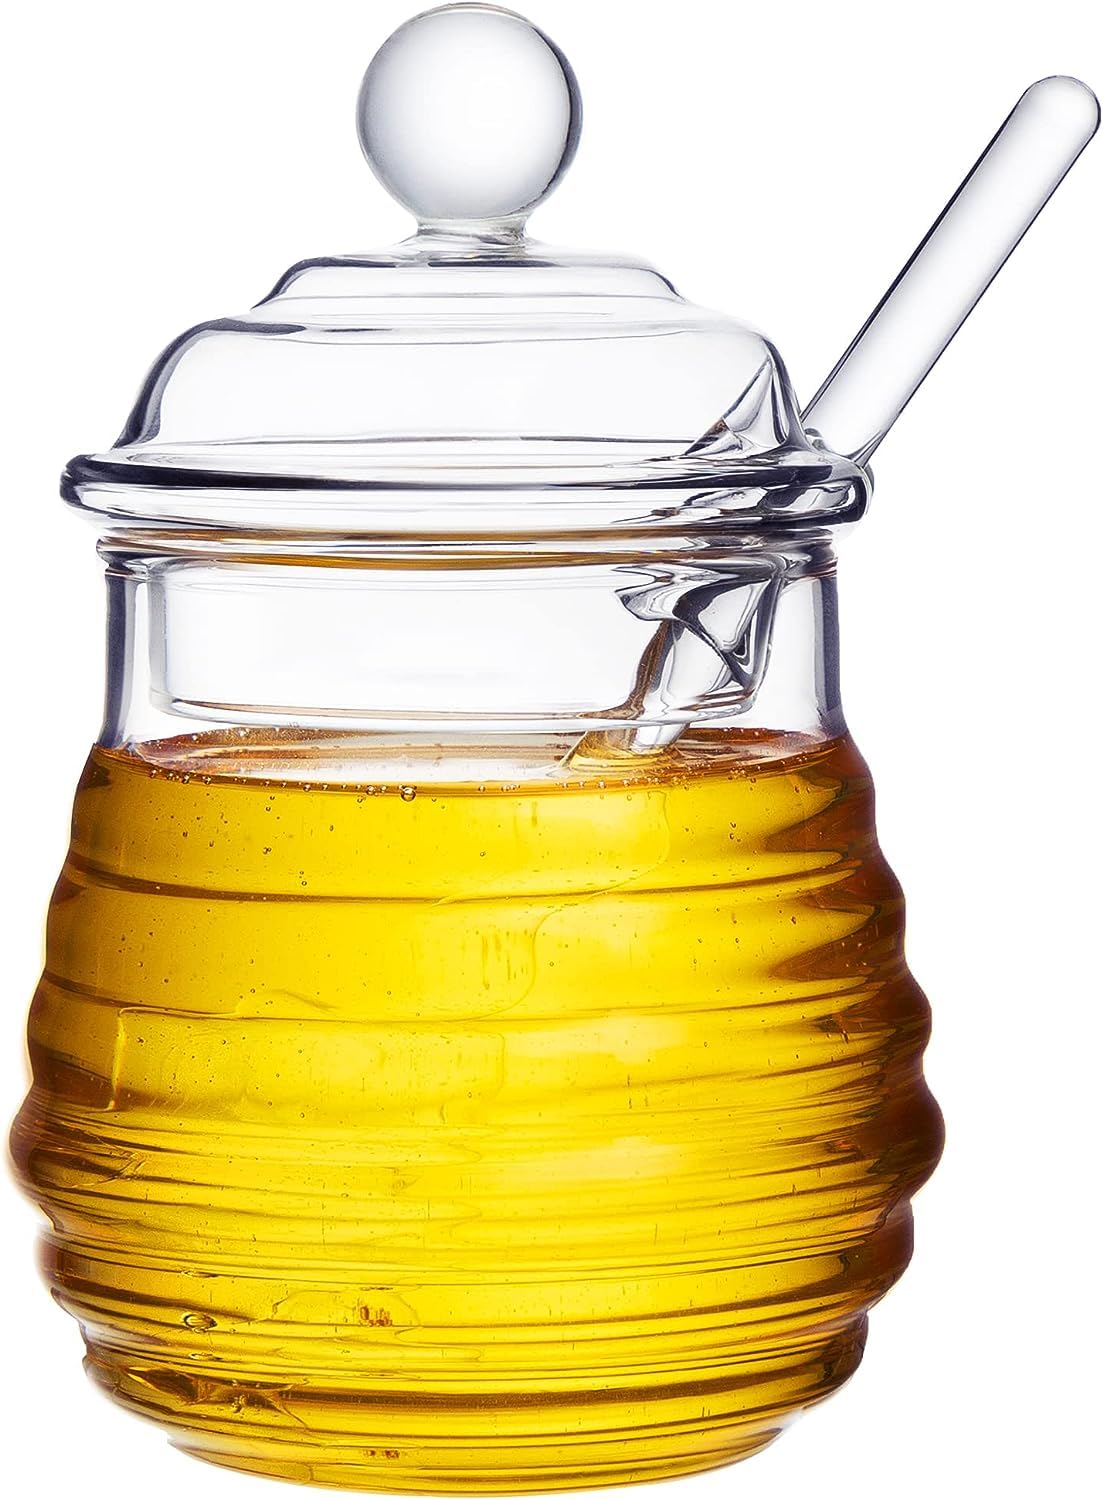 GMFINE Glass Honey Jar with Dipper Stick, Beehive Honey Pot Containers with Dipper and Lid Set for Storing Honey and Syrup, 10 oz, Clear